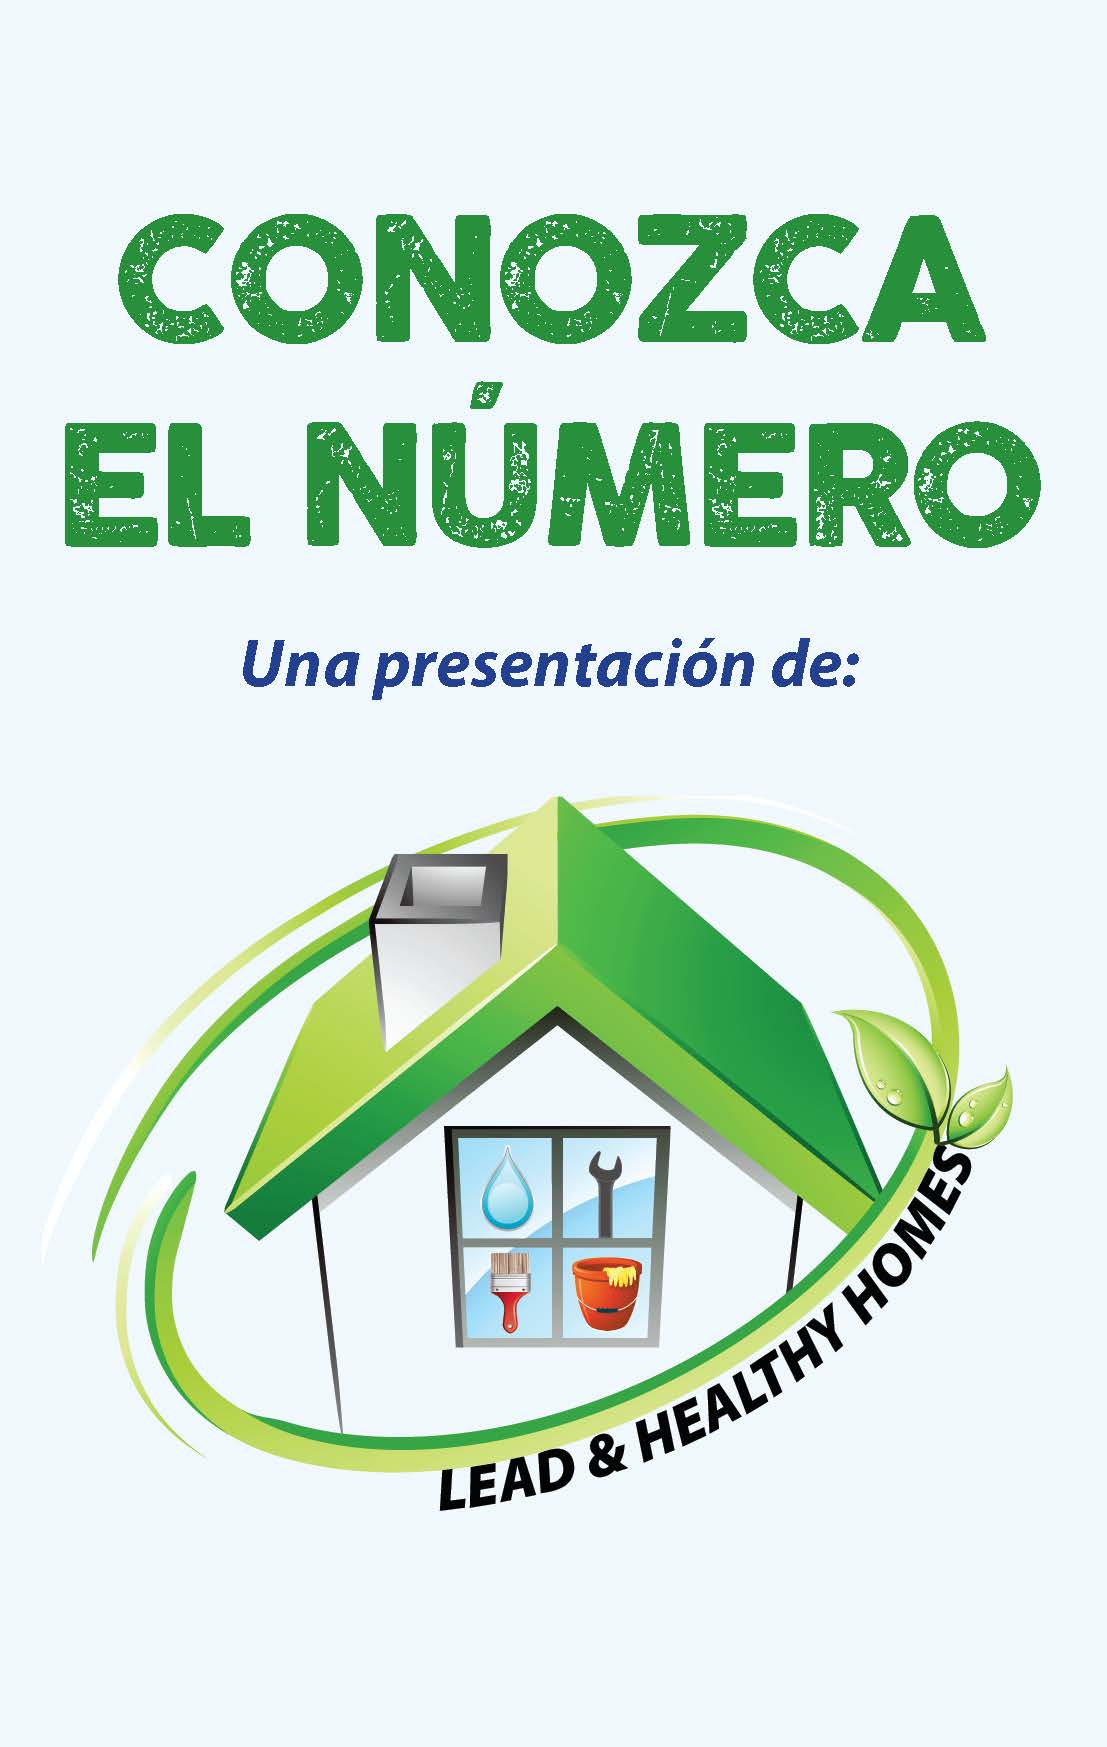 Know The Number - Blood Lead Level Card (Spanish)